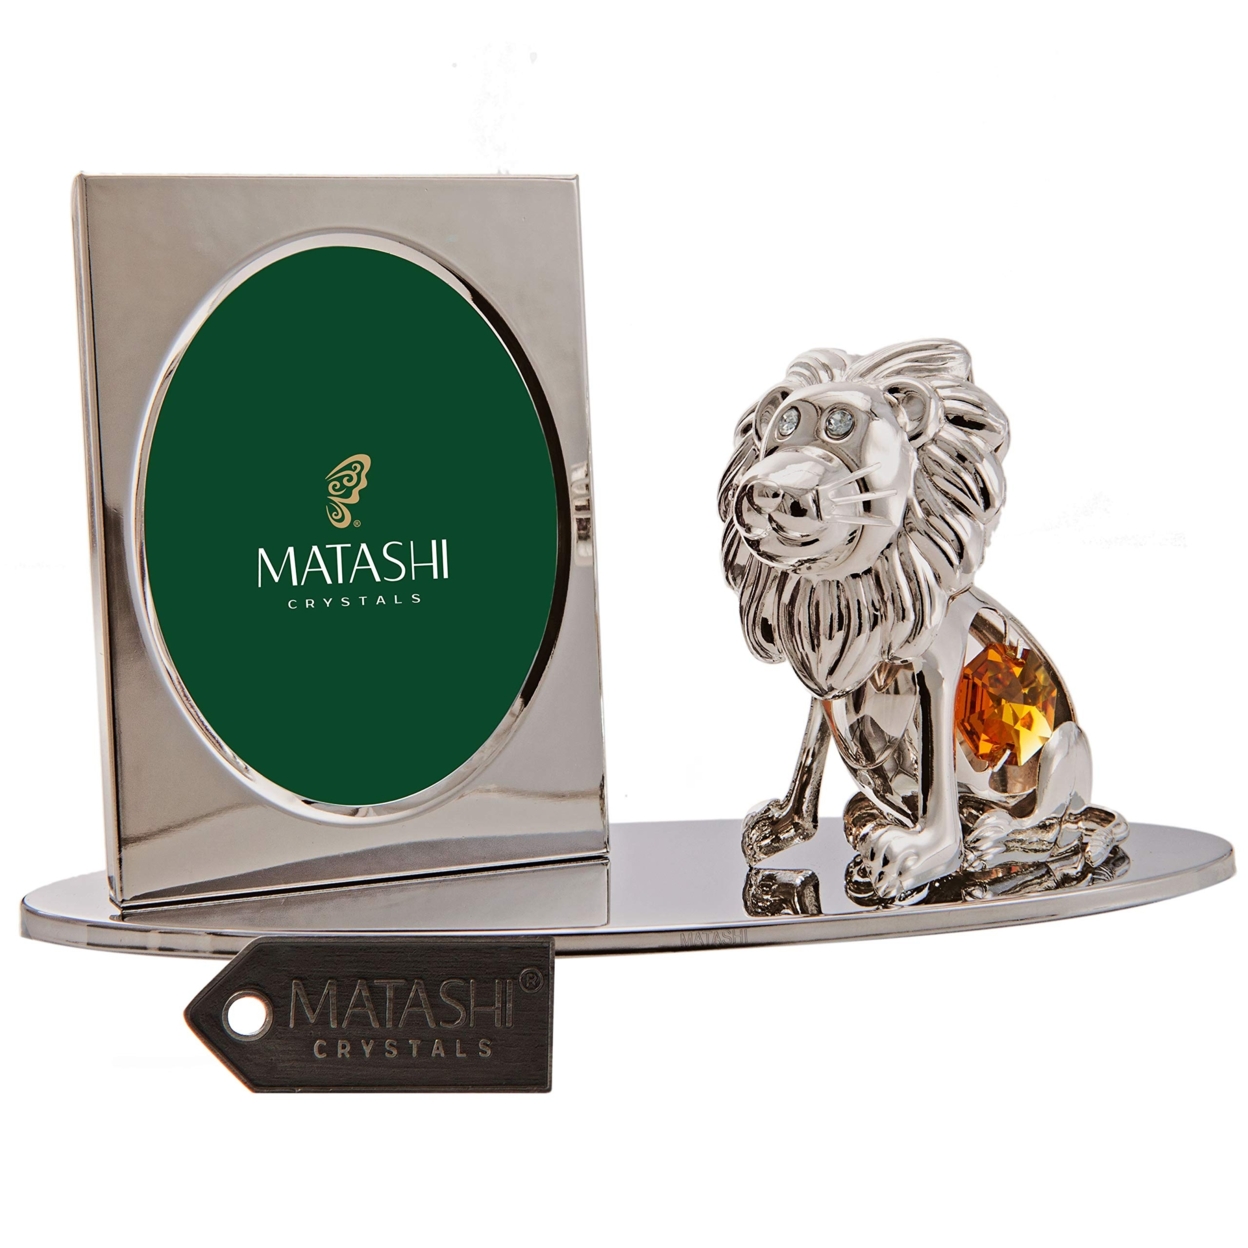 Matashi Silver Plated Picture Frame With Crystal Studded Cartoon Lion Figurine On A Base Gift For Christmas Mother's Day Birthday